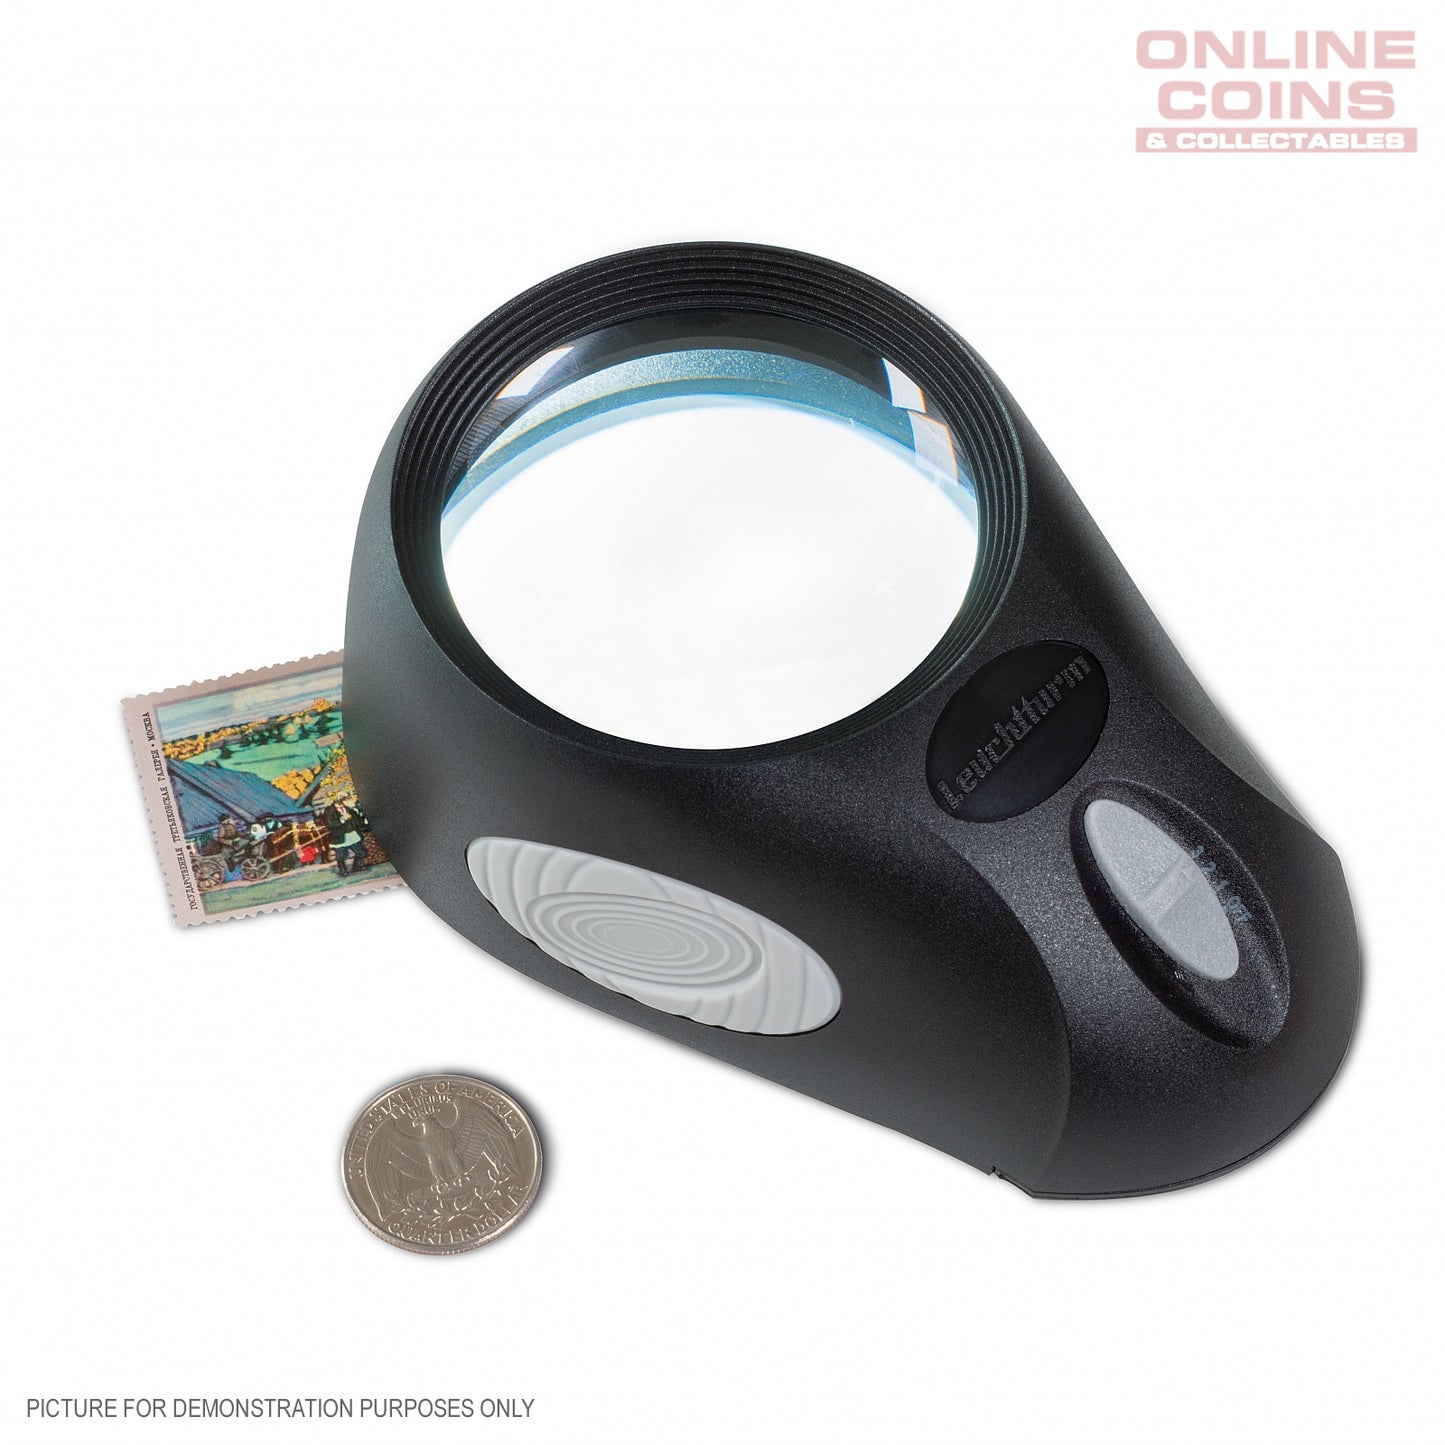 Lighthouse Bullauge Magnifier With 5X Magnification, 6 LED'S, 3 Brightness Settings